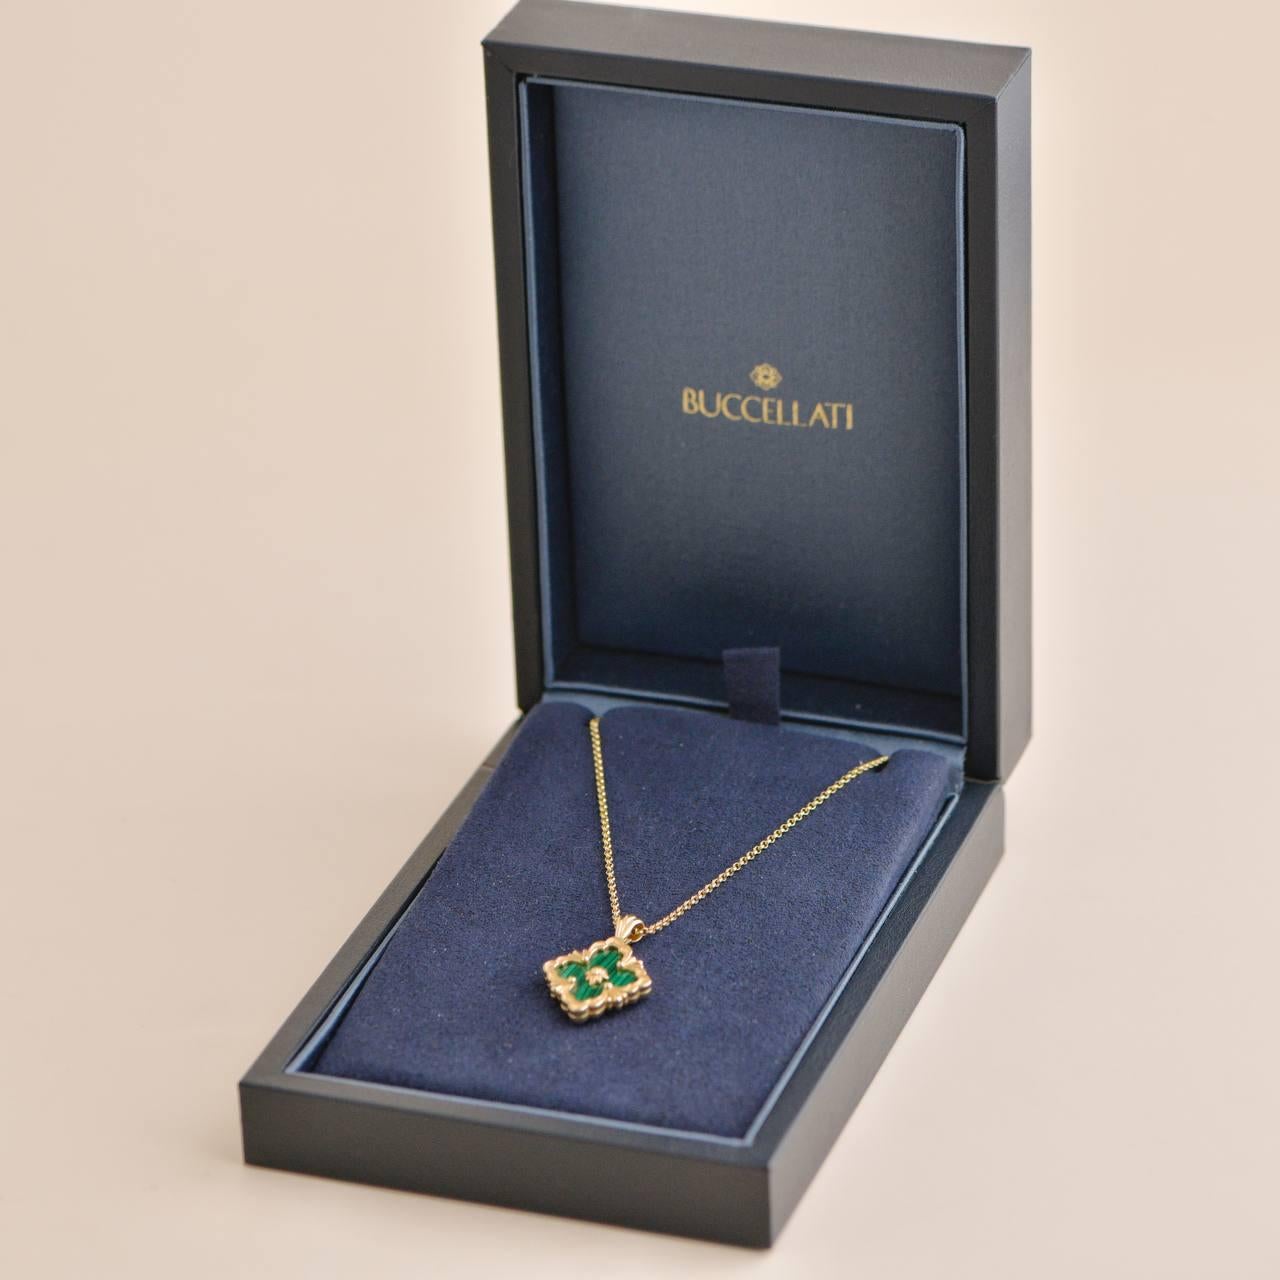 SKU	AT-2217
Comes With	Box Only
Date	2022
Model	JAUPEN014317
Serial Number	B18***
Metal	18k Yellow Gold
Stones	Malachite
Weight	11.4 g
Length	45 cm
Condition	Excellent
Other Info	Big motif, dimensions: 22.7 x 20.4